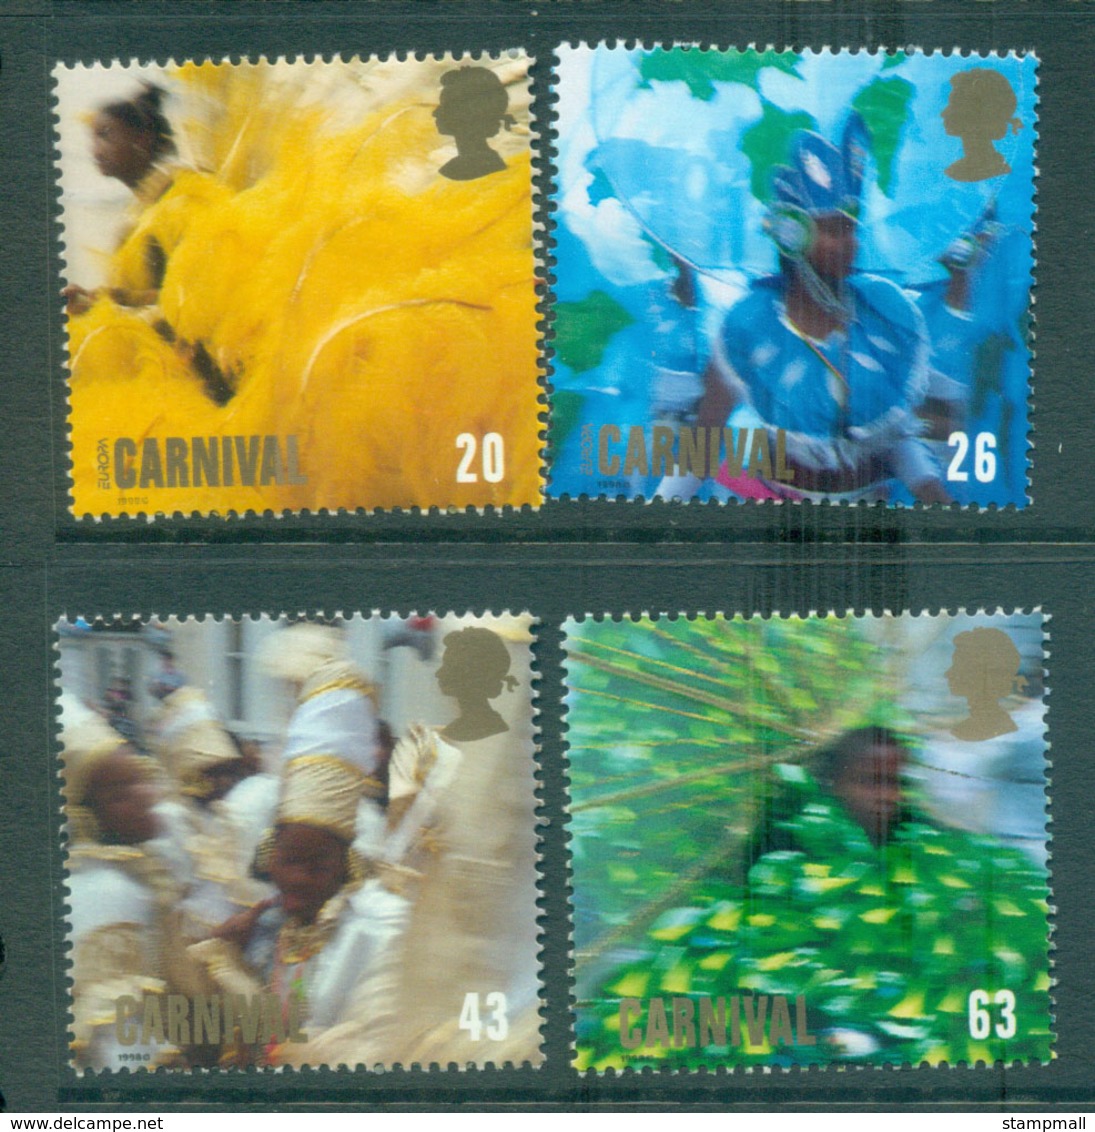 GB 1998 Notting Hill Carnival MLH Lot53564 - Unclassified